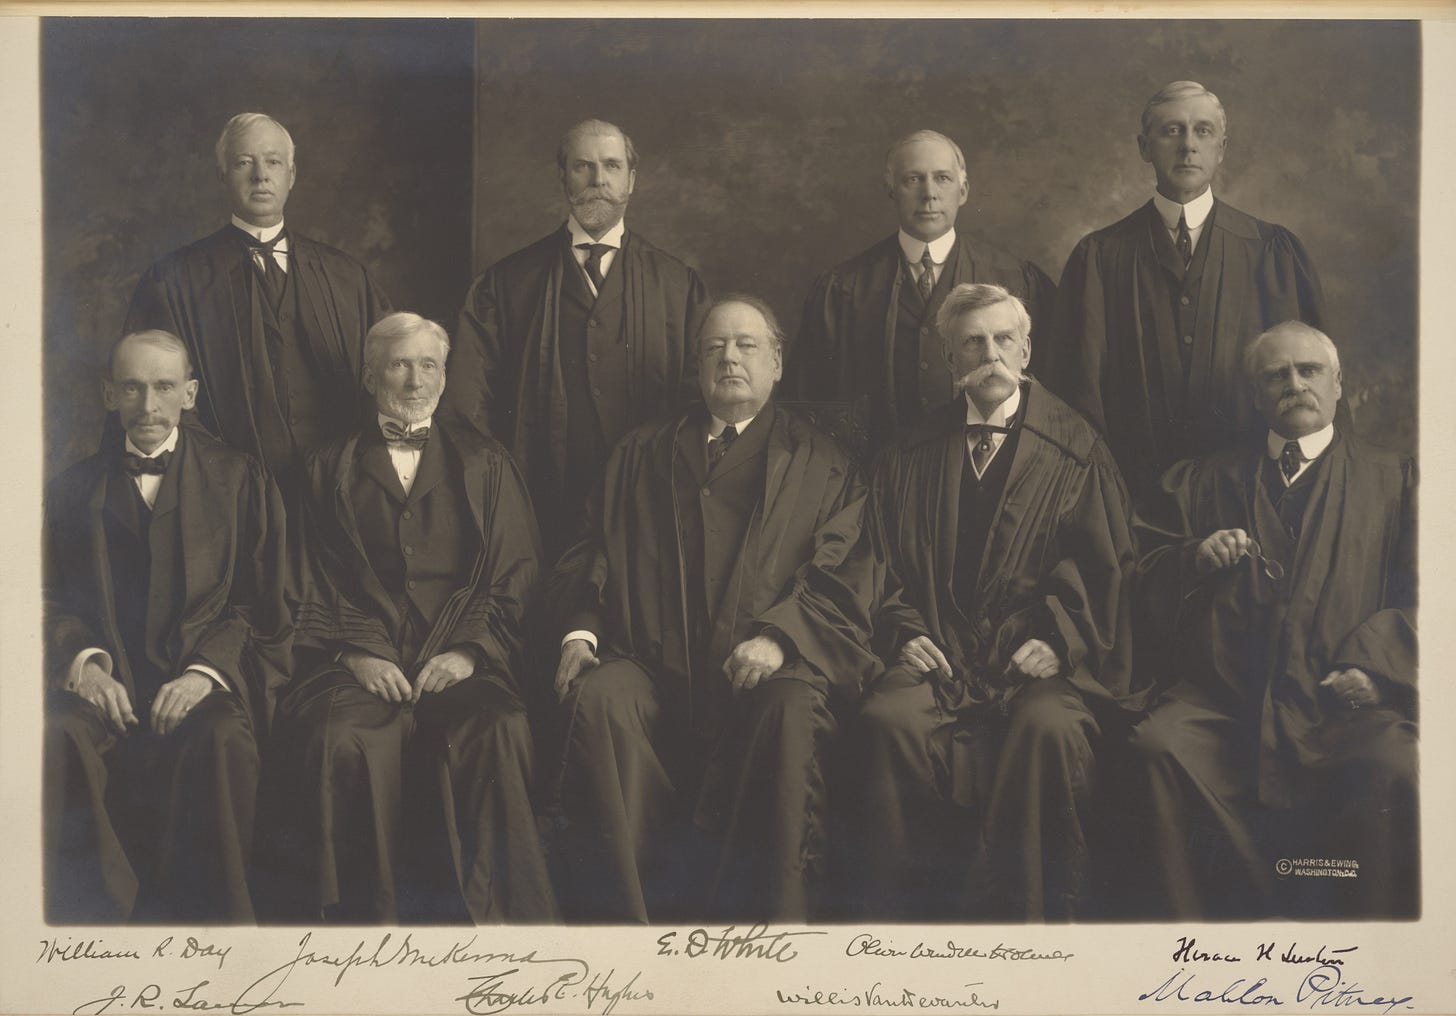 United States Supreme Court: Portraits and Autographs, Oliver Wendell Holmes  - United States Supreme Court: Portraits and Autographs - The University of  Chicago Library